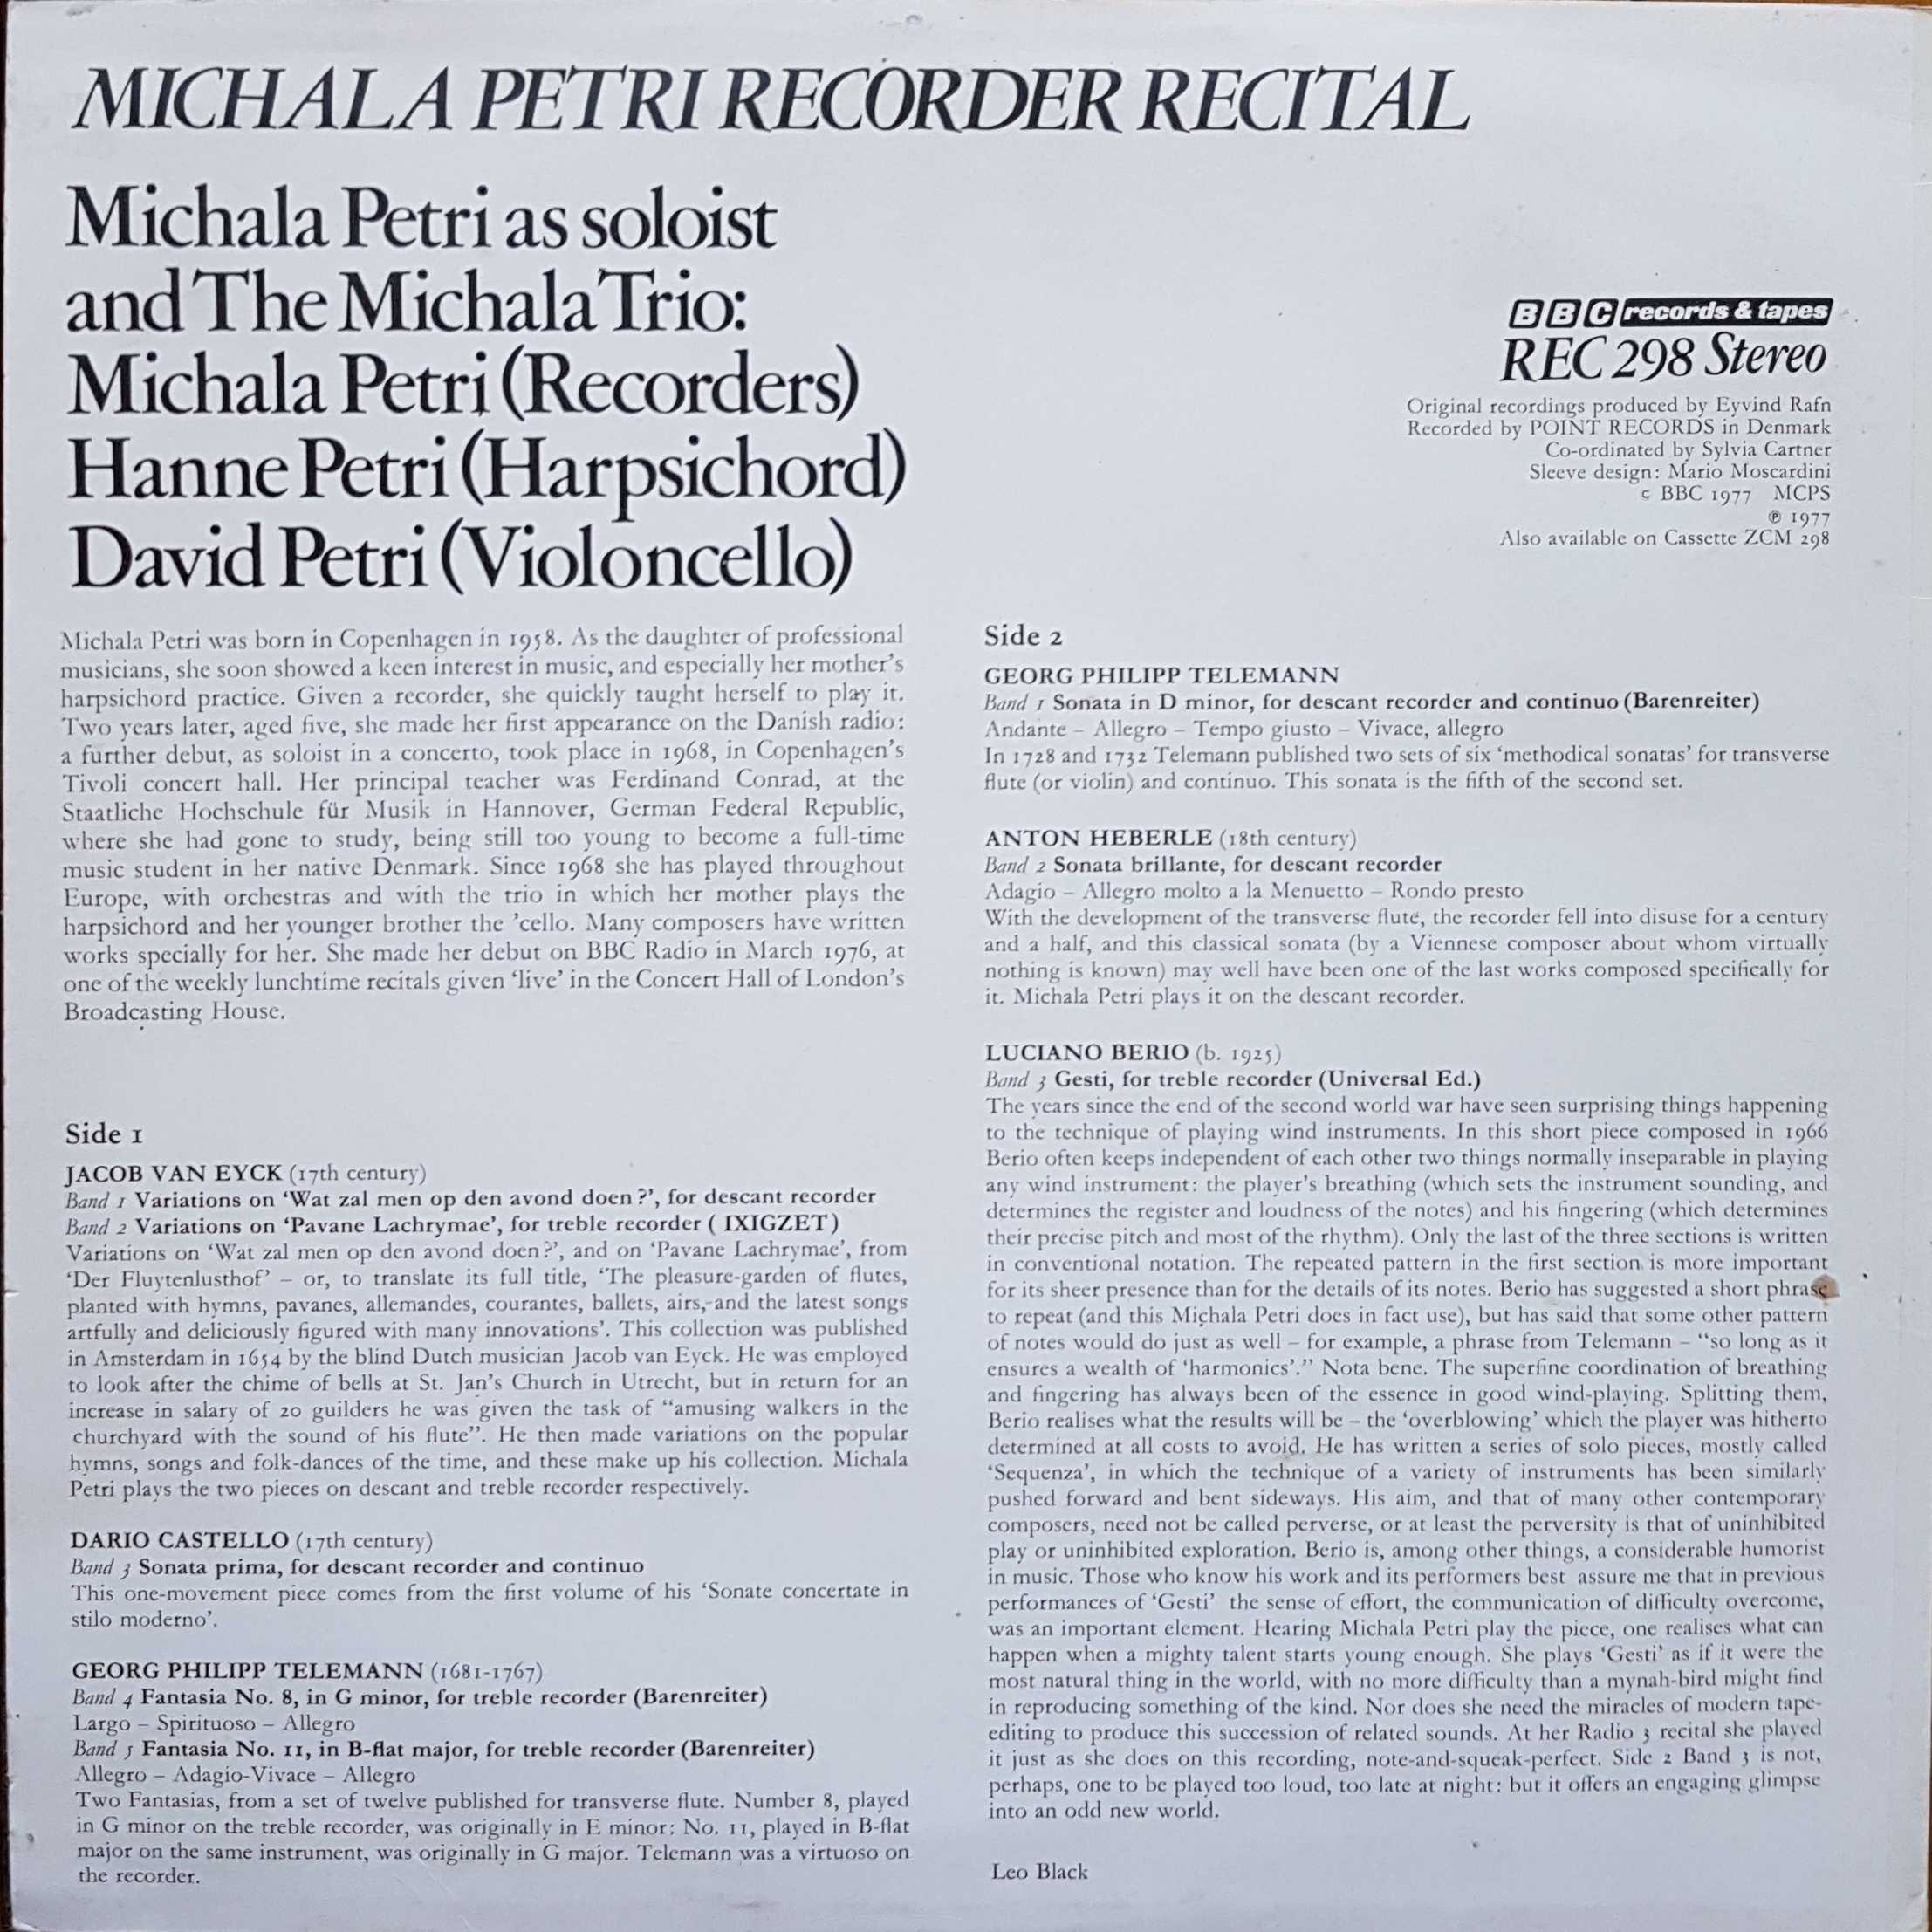 Picture of REC 298 Michala Petri recorder recital by artist Michala Petri  from the BBC records and Tapes library